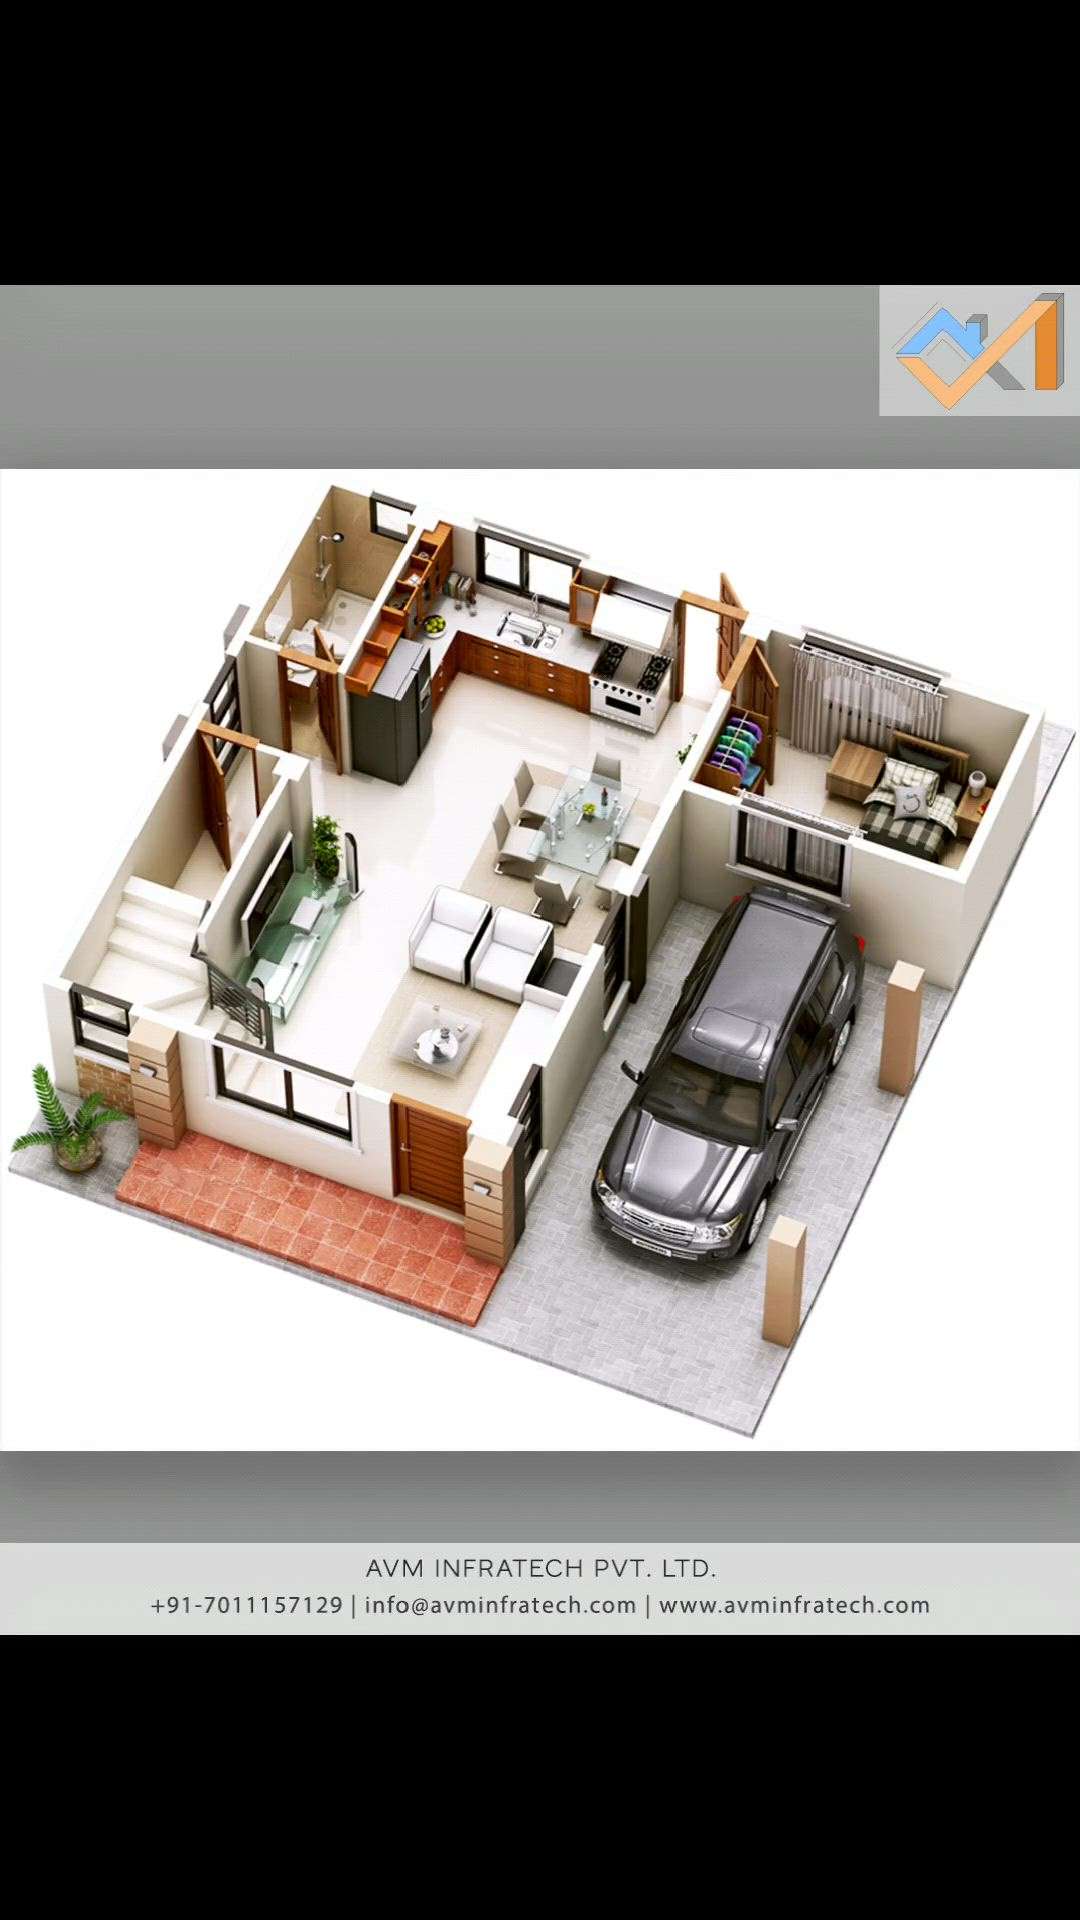 A small house is cost-effective and easy to maintain if designed with efficient space utilisation. Globally, there has been an increase in the number of small homes.


Follow us for more such amazing updates. 
.
.
#smallhome #smallhouse #home #house #houseplan #homeplan #houseplans #homeplans #plan #design #project #designplan #planning #space #realestate #property #architect #architecture #interior #interiordesign #architectural #knowledge #avminfratech #aesthetic #perspective #3drender #3d